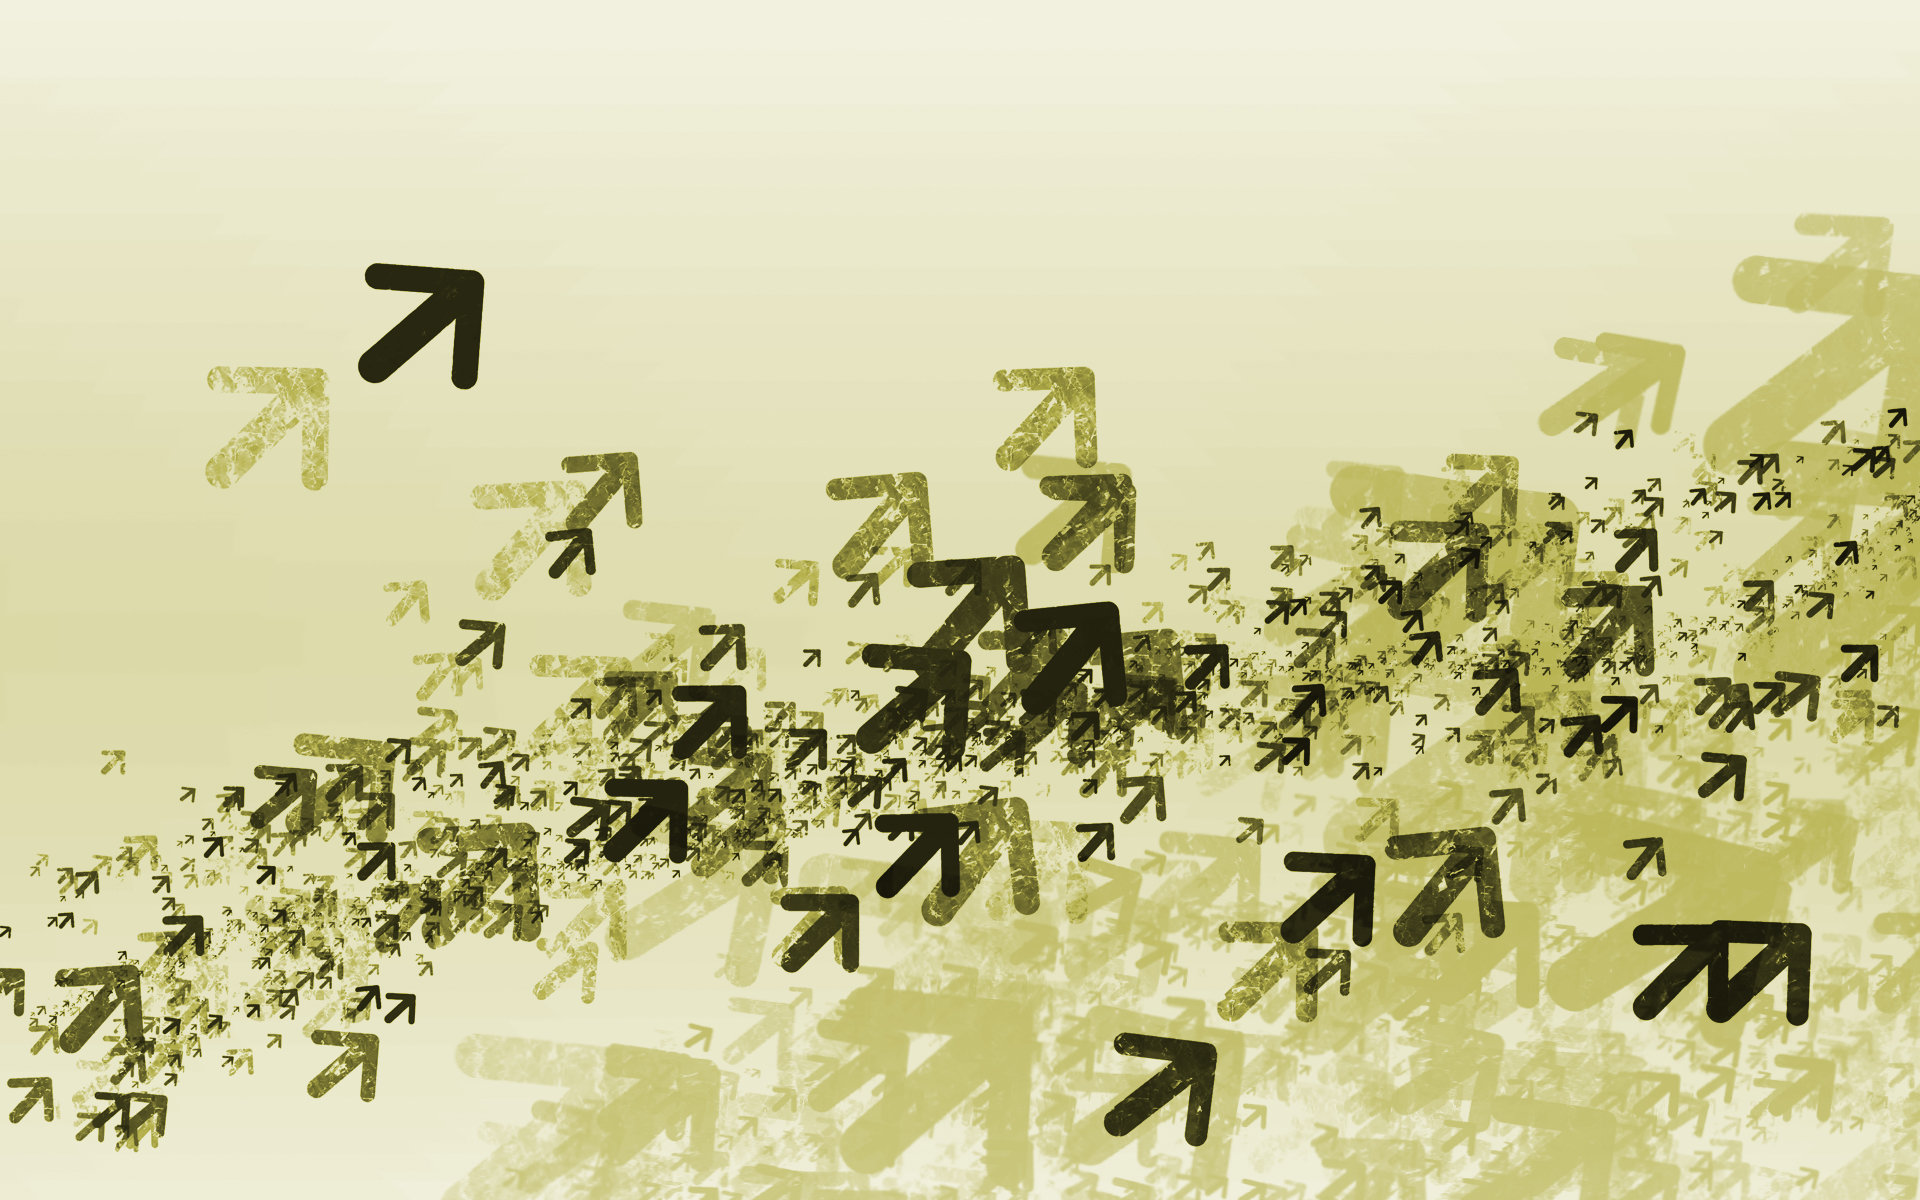 abstract, Swarm, Flock, Fly, Arrows, Simple Wallpaper